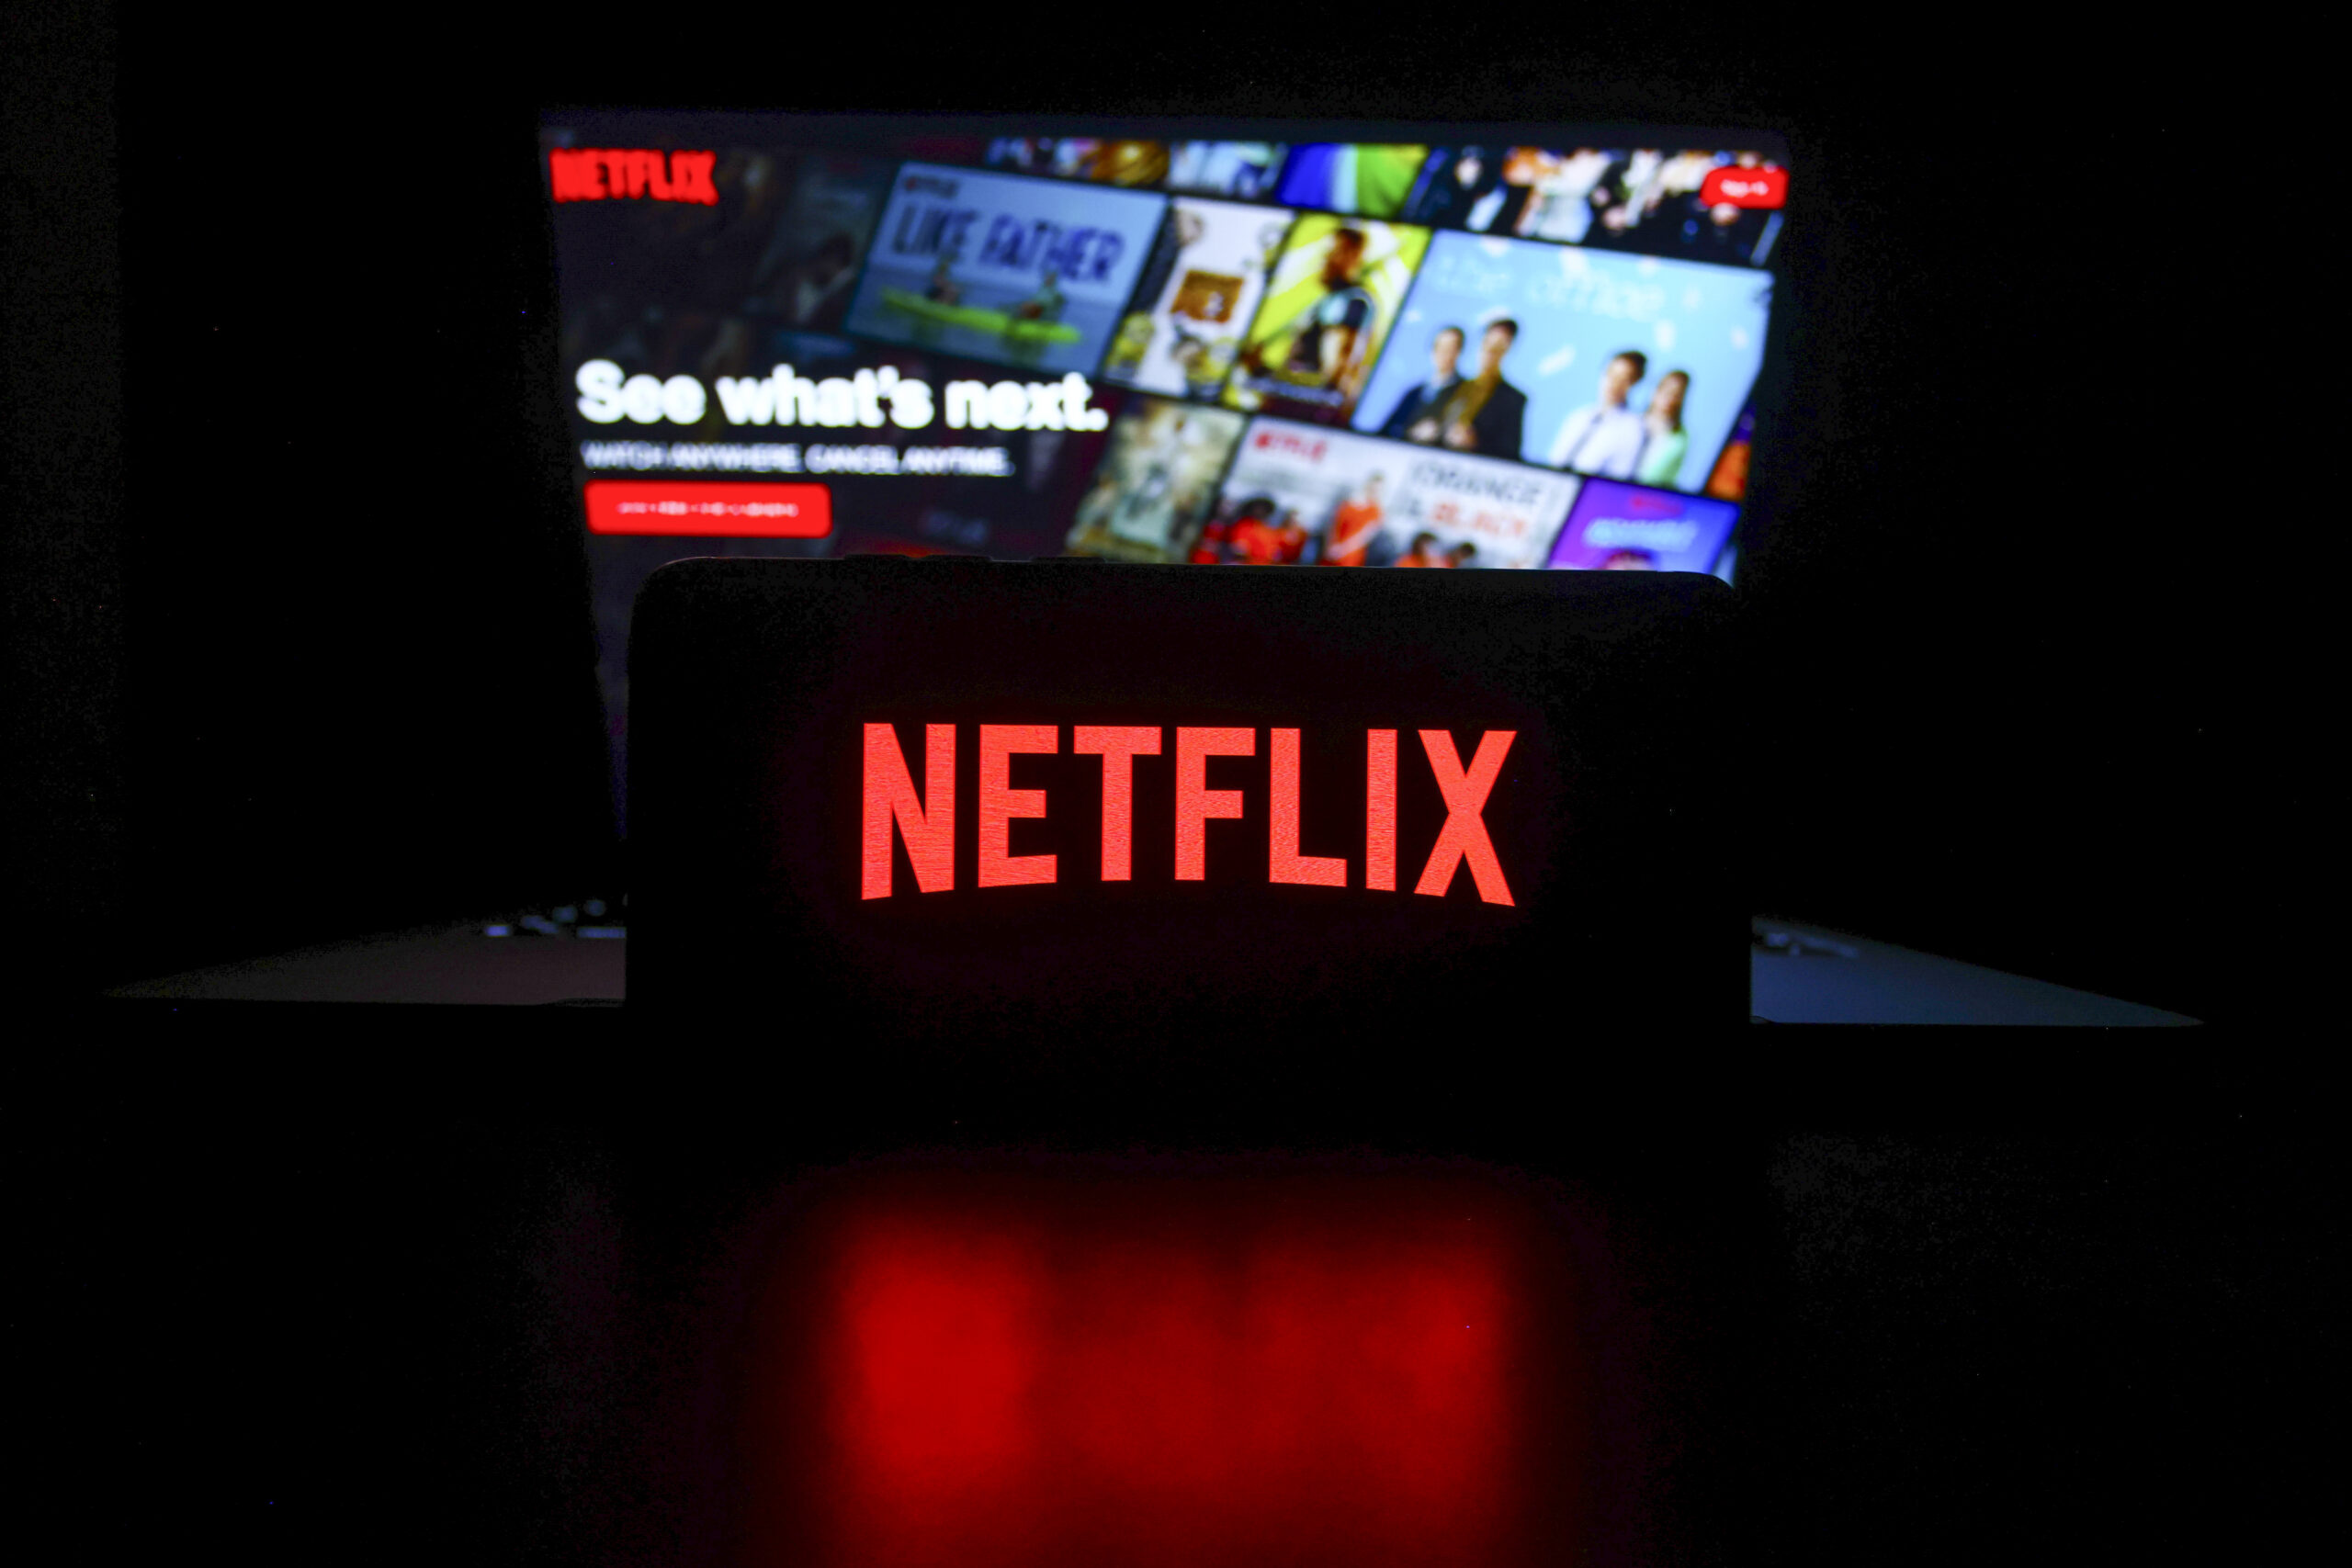 Netflix users will now only have three plans to choose from including Standard with Ads, Standard Ad-free, or the Ad-free Premium plan